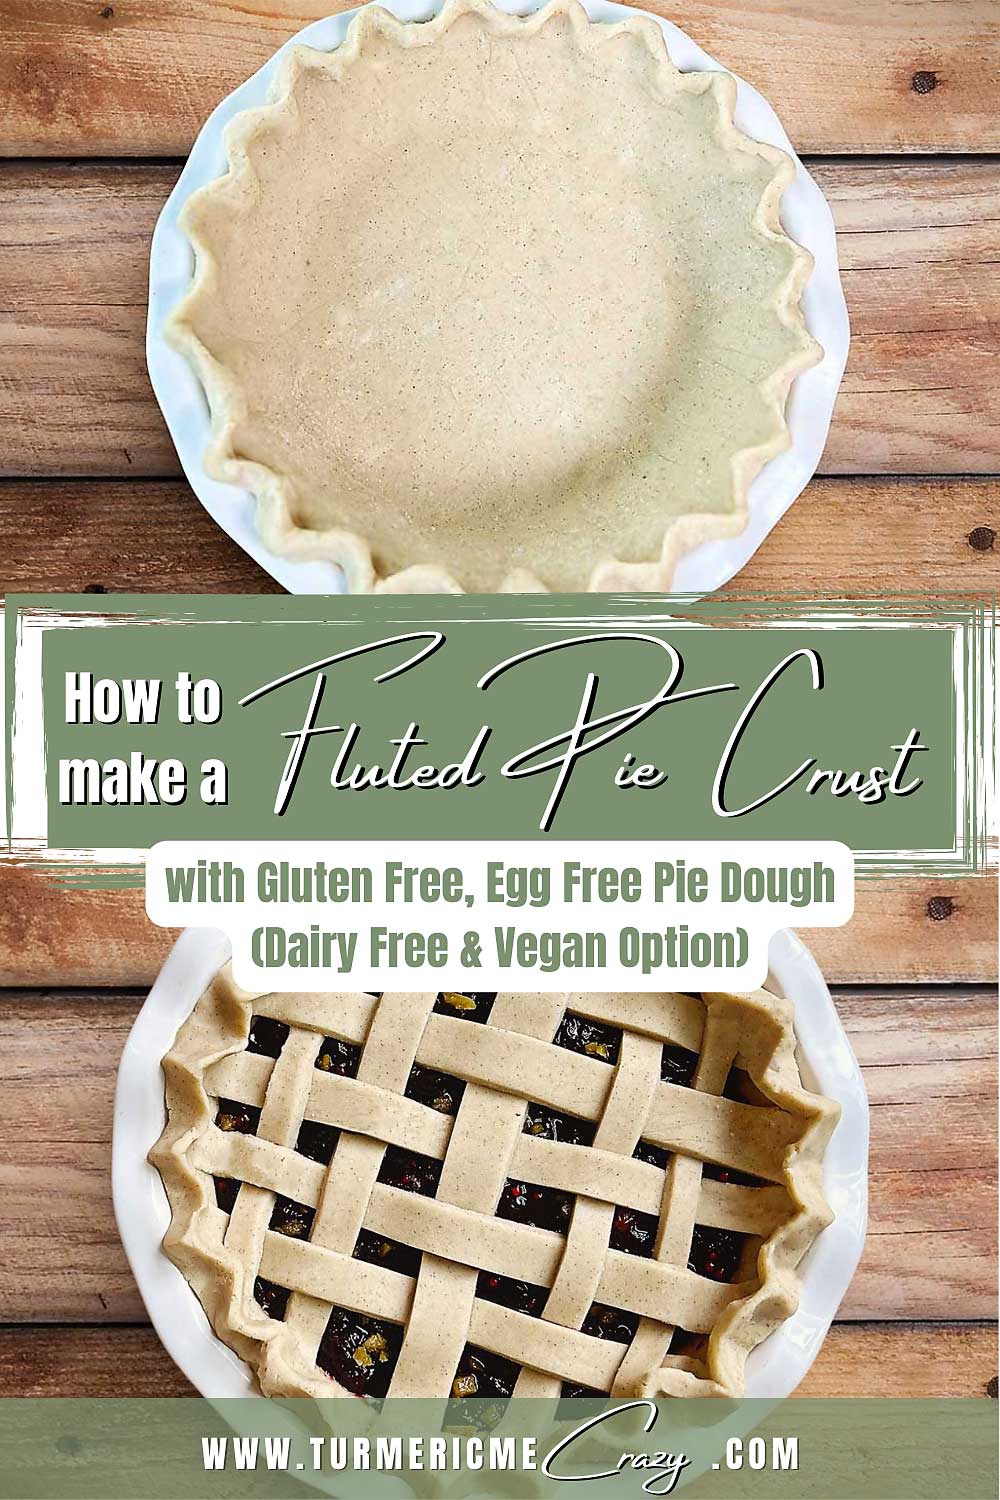 Create gluten-free and egg-free pastry perfection with our step-by-step guide to creating a stunning fluted pie crust! Learn the artful technique ensuring a visually appealing and exquisite fluted edge that promises a gluten-free and egg-free indulgence without compromising taste or aesthetics. Join our gluten-free baking adventure to uncover the secrets of crafting a flawless fluted pie crust – where every slice is a celebration of both art and dietary preference. #GlutenFreeBaking #EggFreeDesserts #PastryPerfection #LatticePieCrust #GlutenFreeTreats #BakingAdventure #DietaryPreference #ArtfulBaking #HomemadeGlutenFree #EgglessBaking #GlutenFreeDelight #AllergyFriendly #HealthyDesserts #GuiltFreeIndulgence #DietaryCelebration #FlawlessBakes #CreativeBaking #LatticeDesign #GlutenFreeLife #EggFreeOptions #howtofluteapiecrust #howtocrimpapie